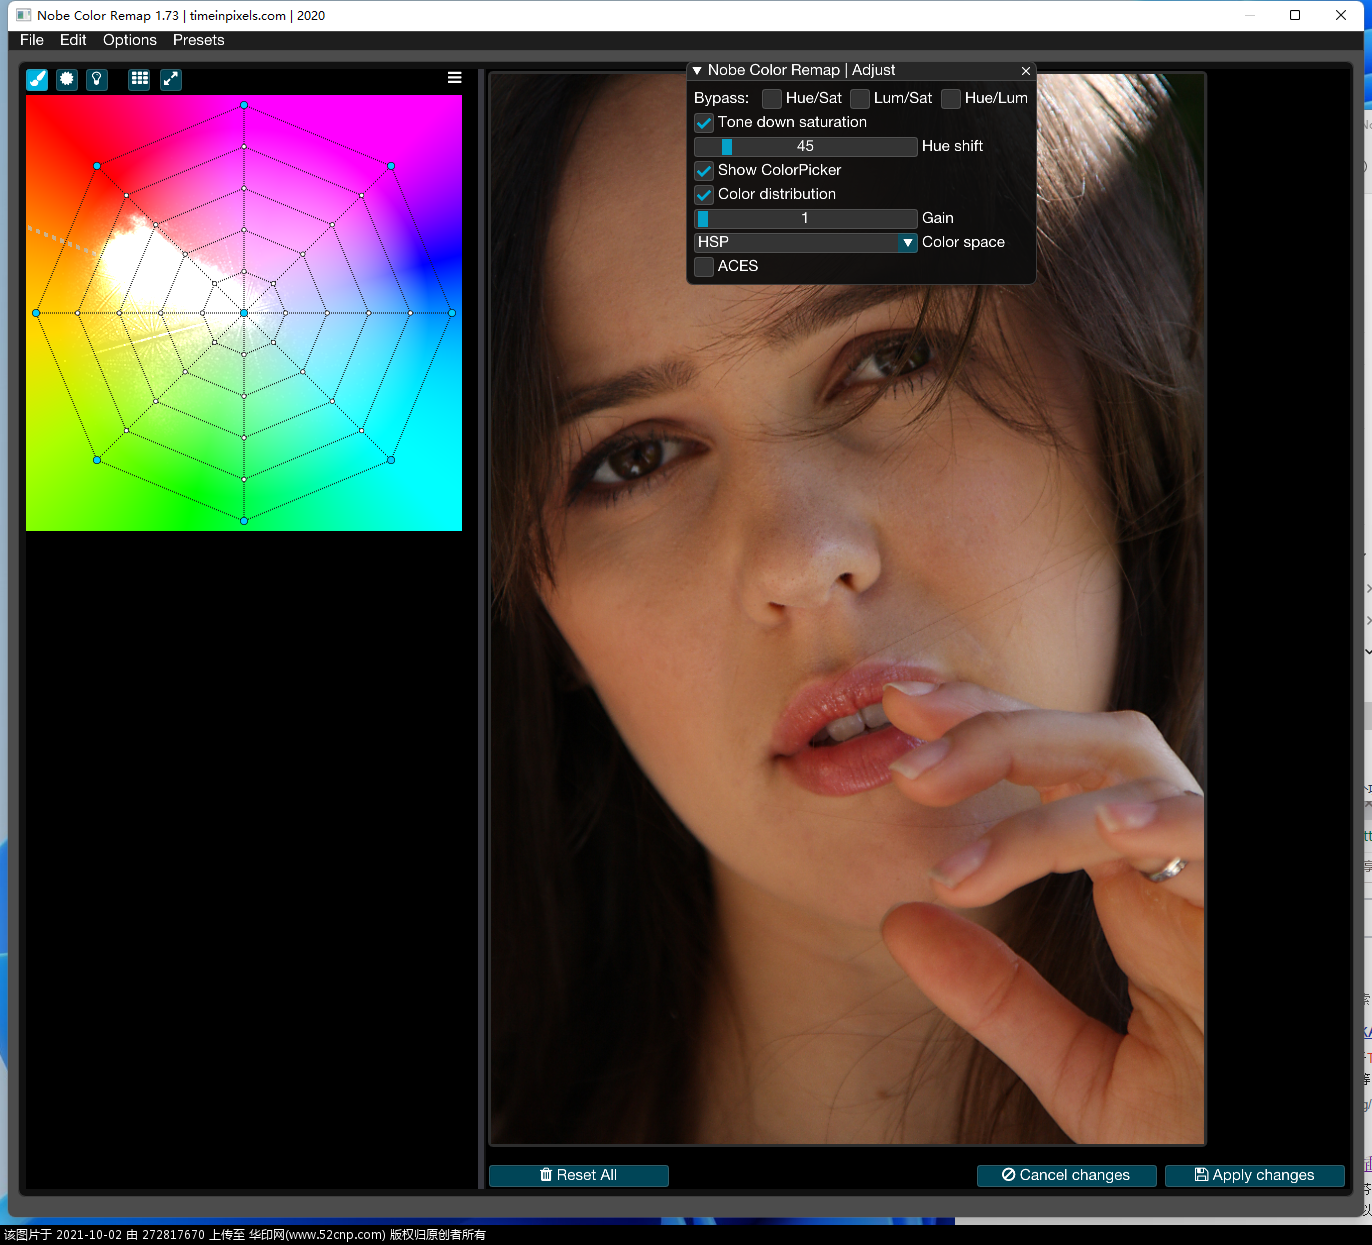 Nobe Color Remap 1.73 PS调色滤镜{tag}(1)